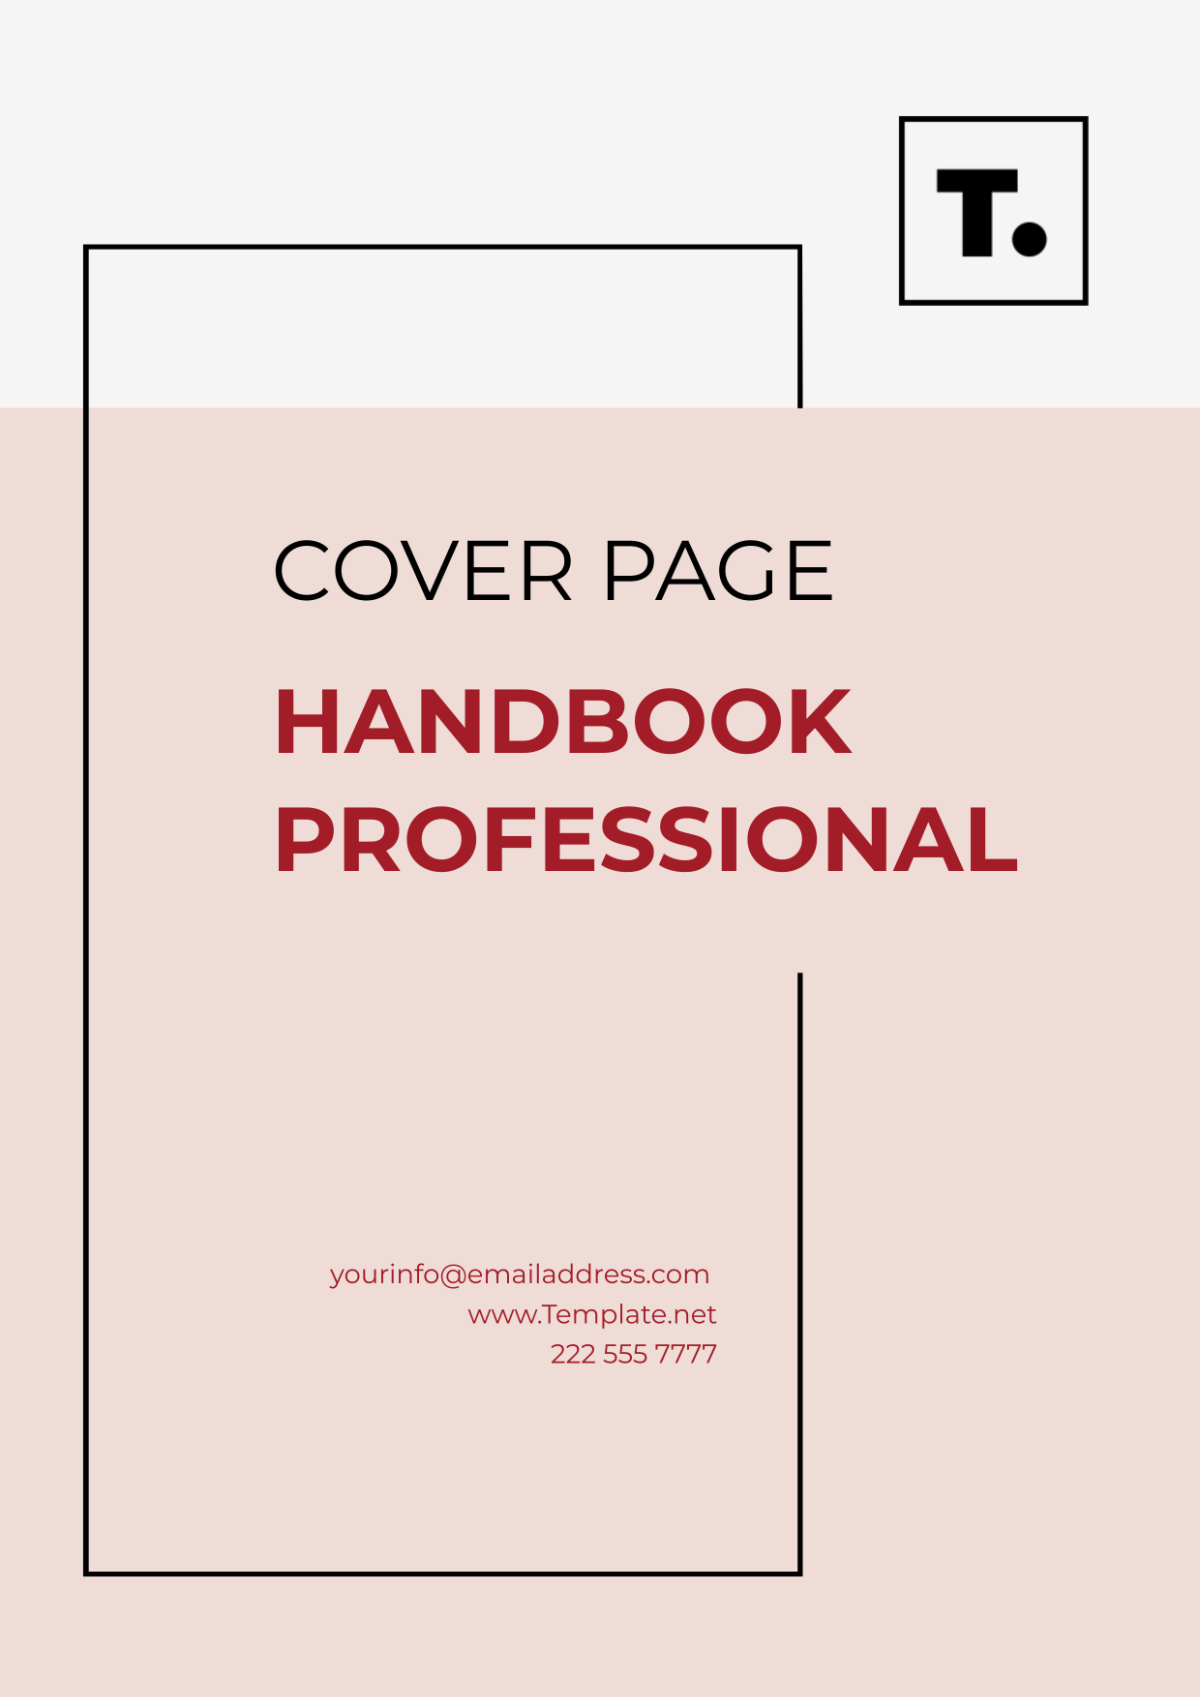 Handbook Professional Cover Page Template